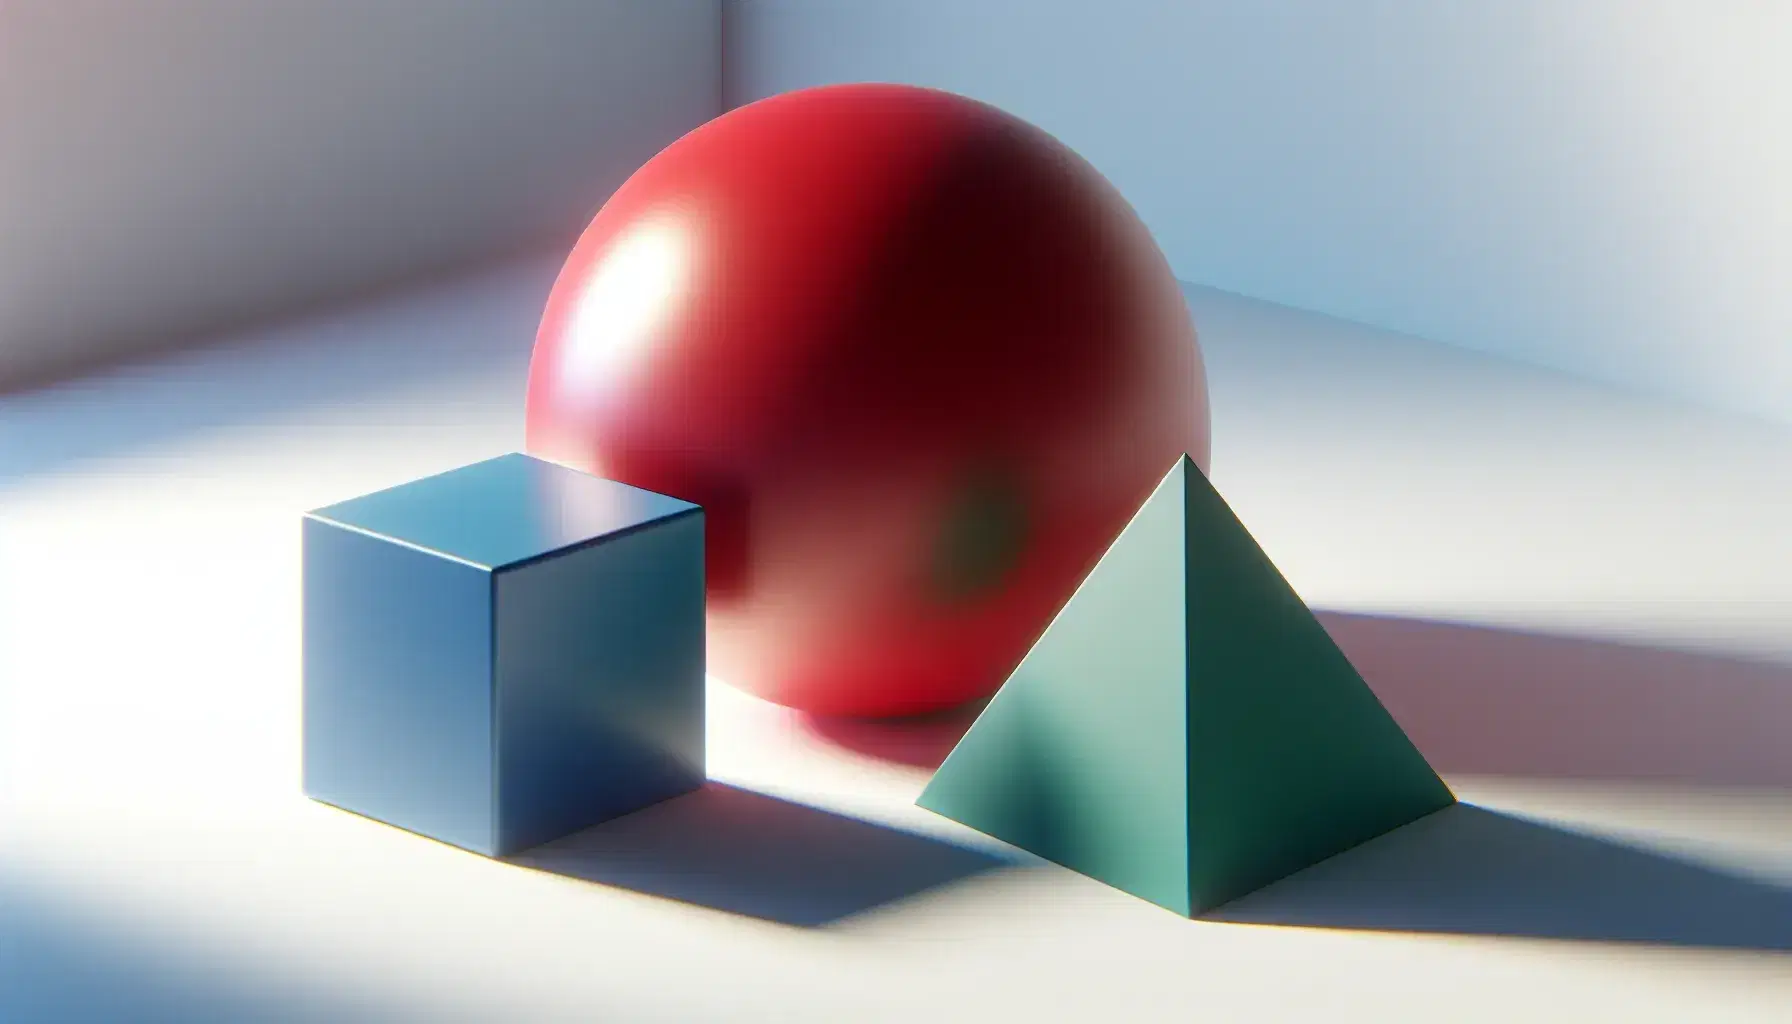 Three geometric shapes—a red sphere, a blue cube, and a green pyramid—with colored arrows pointing in different directions on a white background.